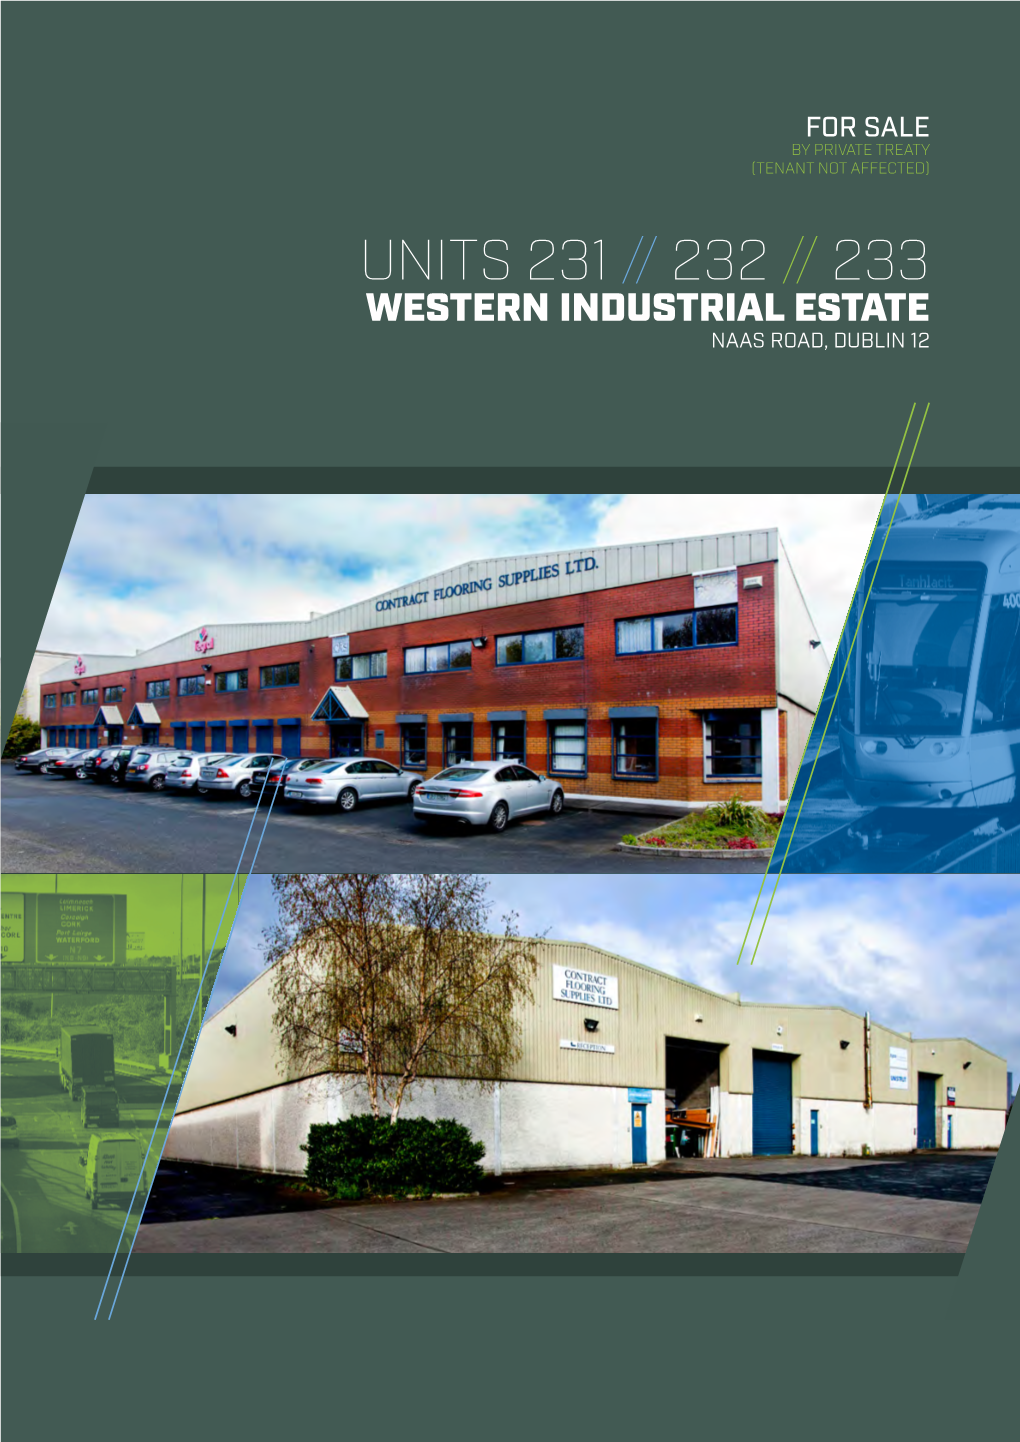 Units 231 // 232 // 233 Western Industrial Estate Naas Road, Dublin 12 Investmentsummary